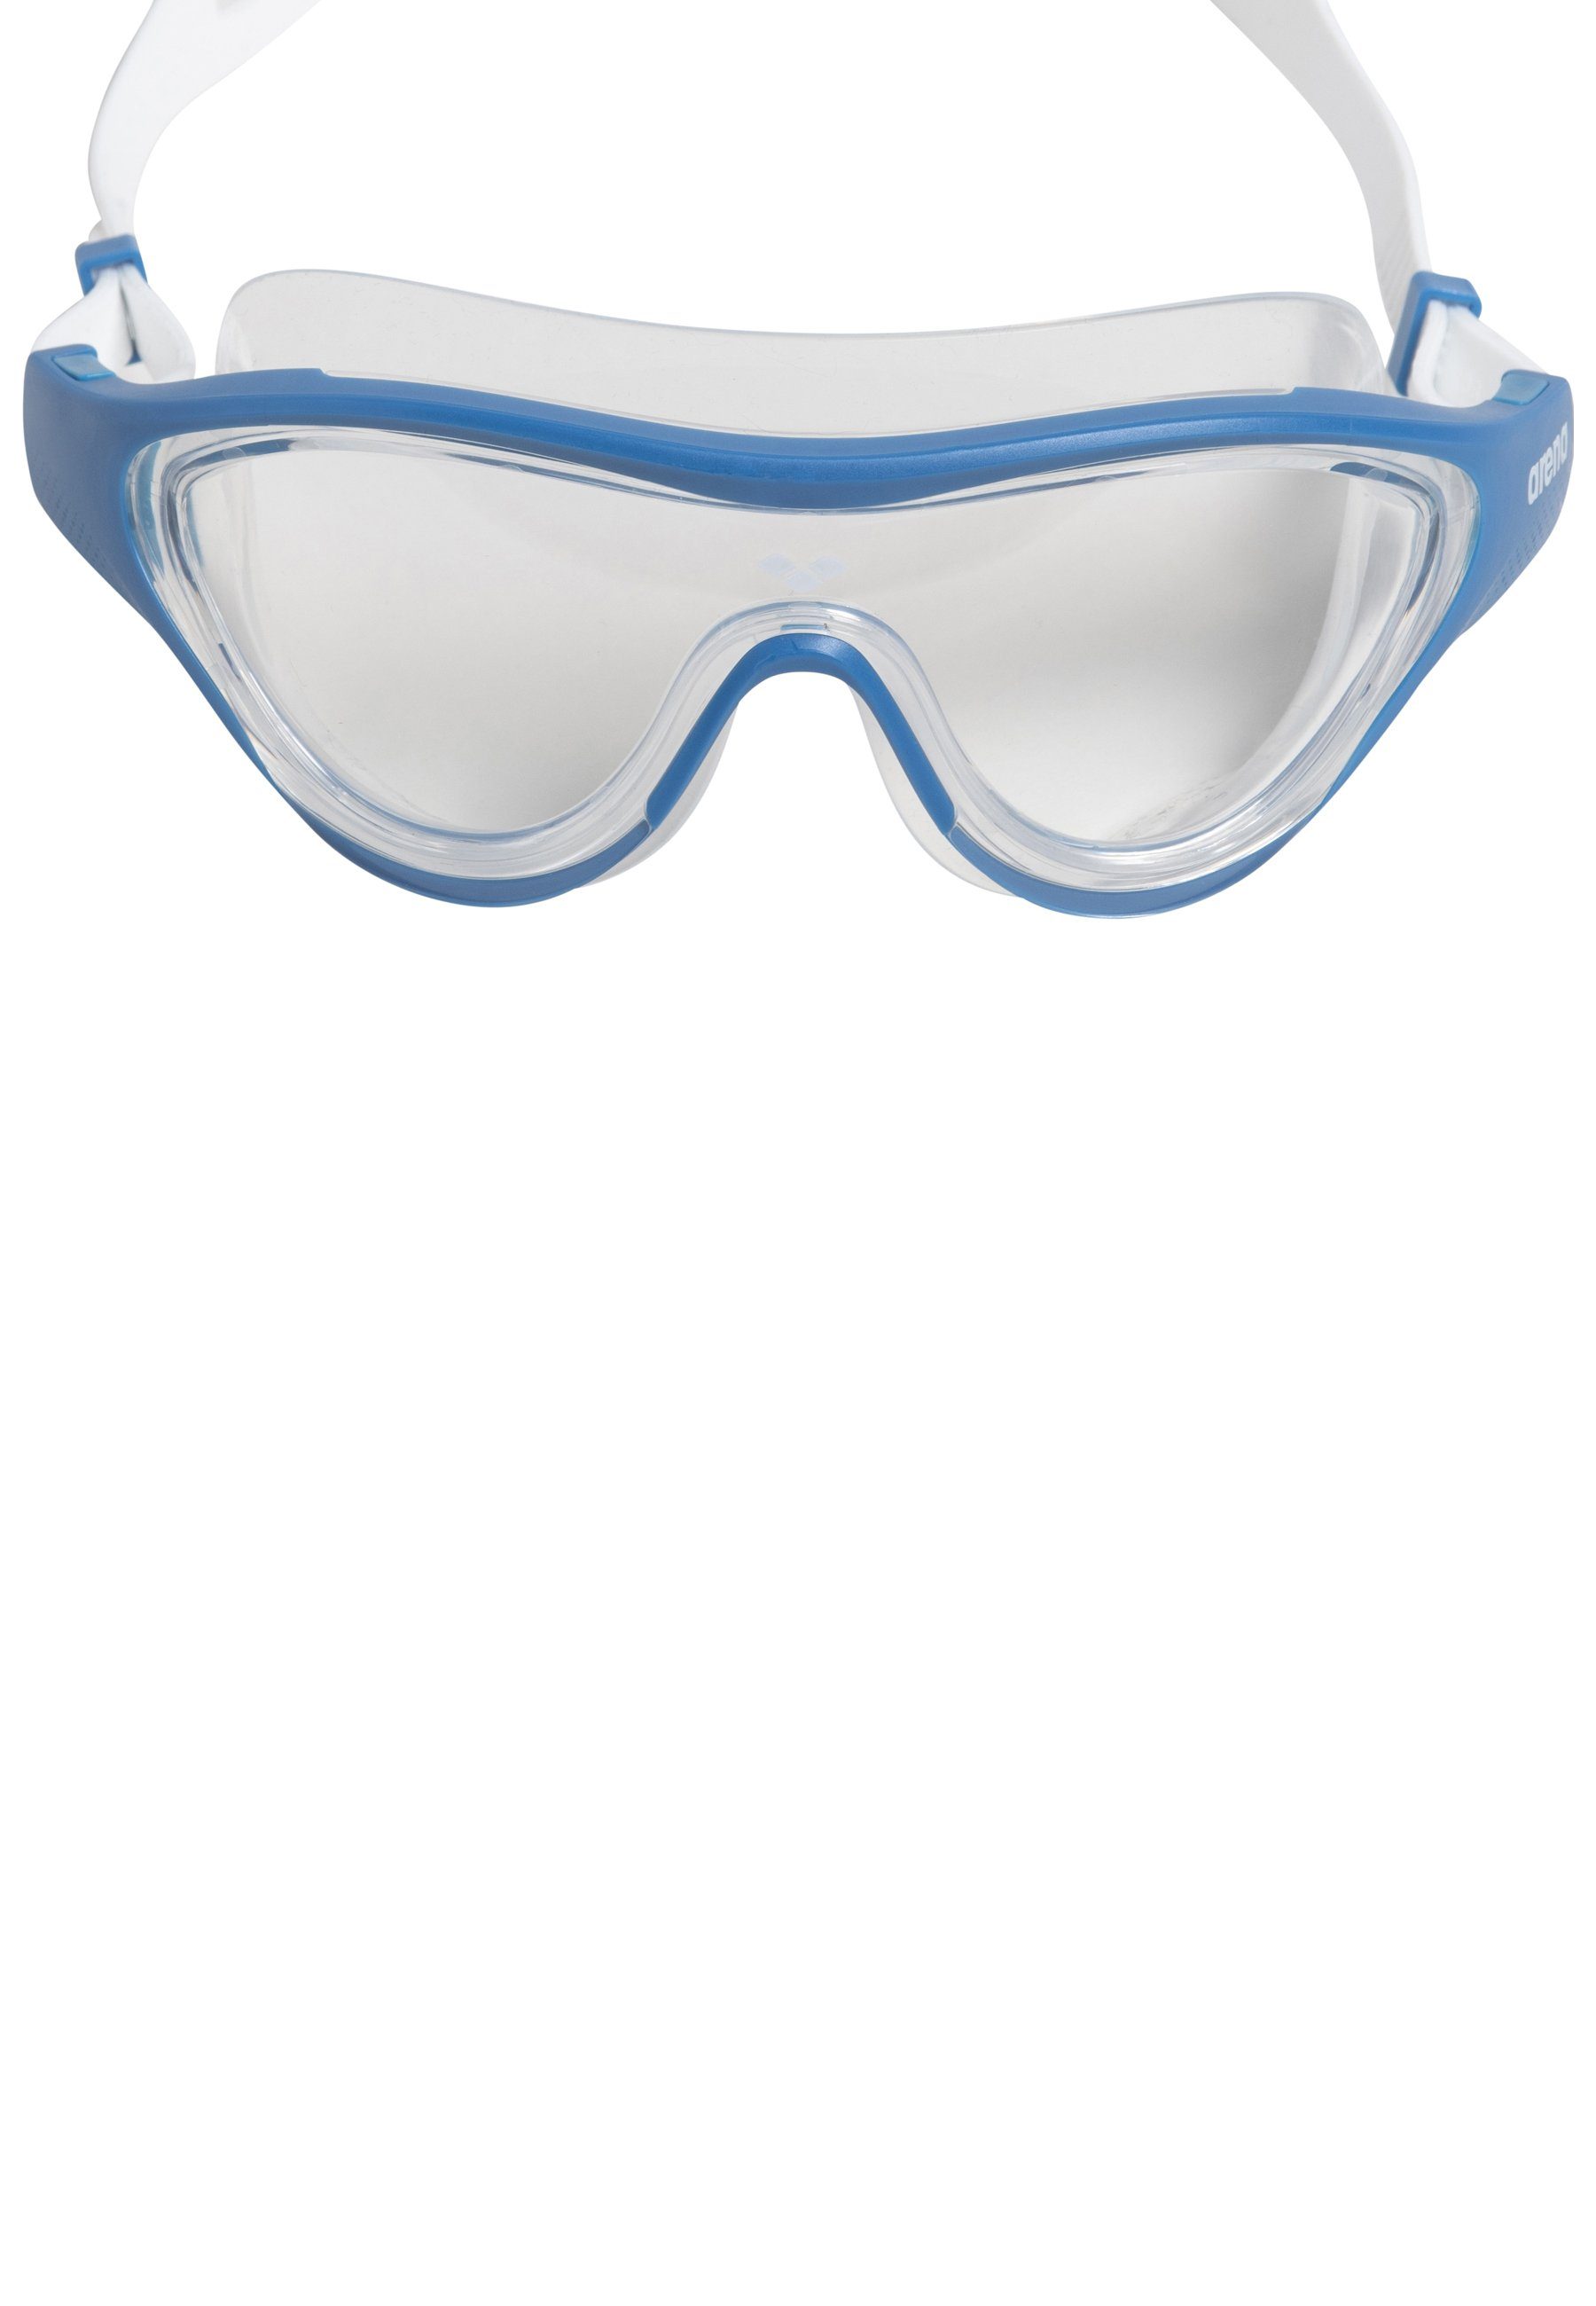 The Sportbrille clear-blue-white One Mask Arena